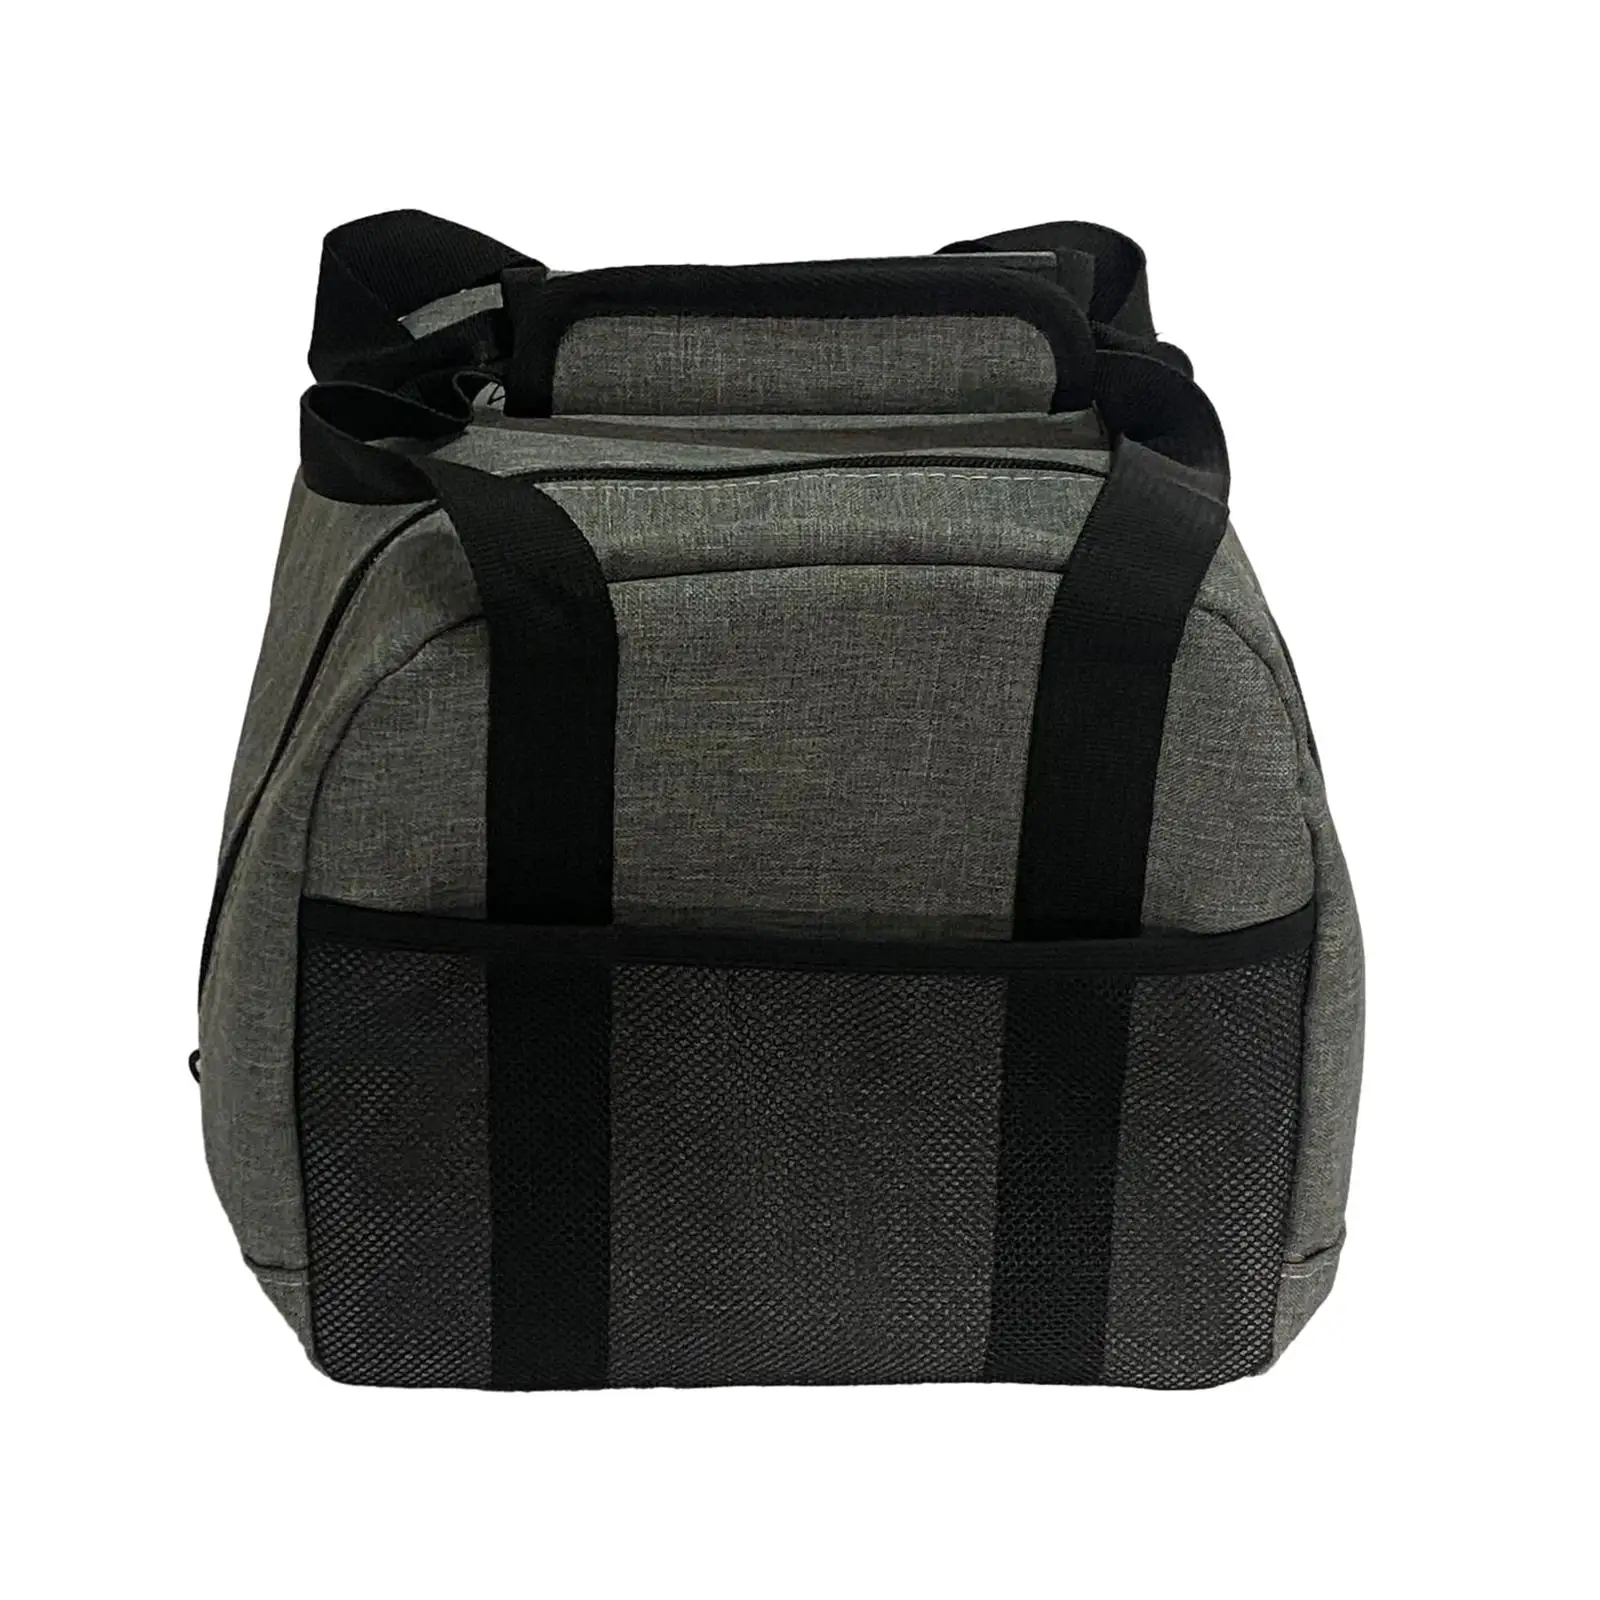 Single Bowling Ball Bag with External Mesh Pocket Carry Bag Carrier Double Zipper Easy to Carry Compact Handbag Bowling Gift